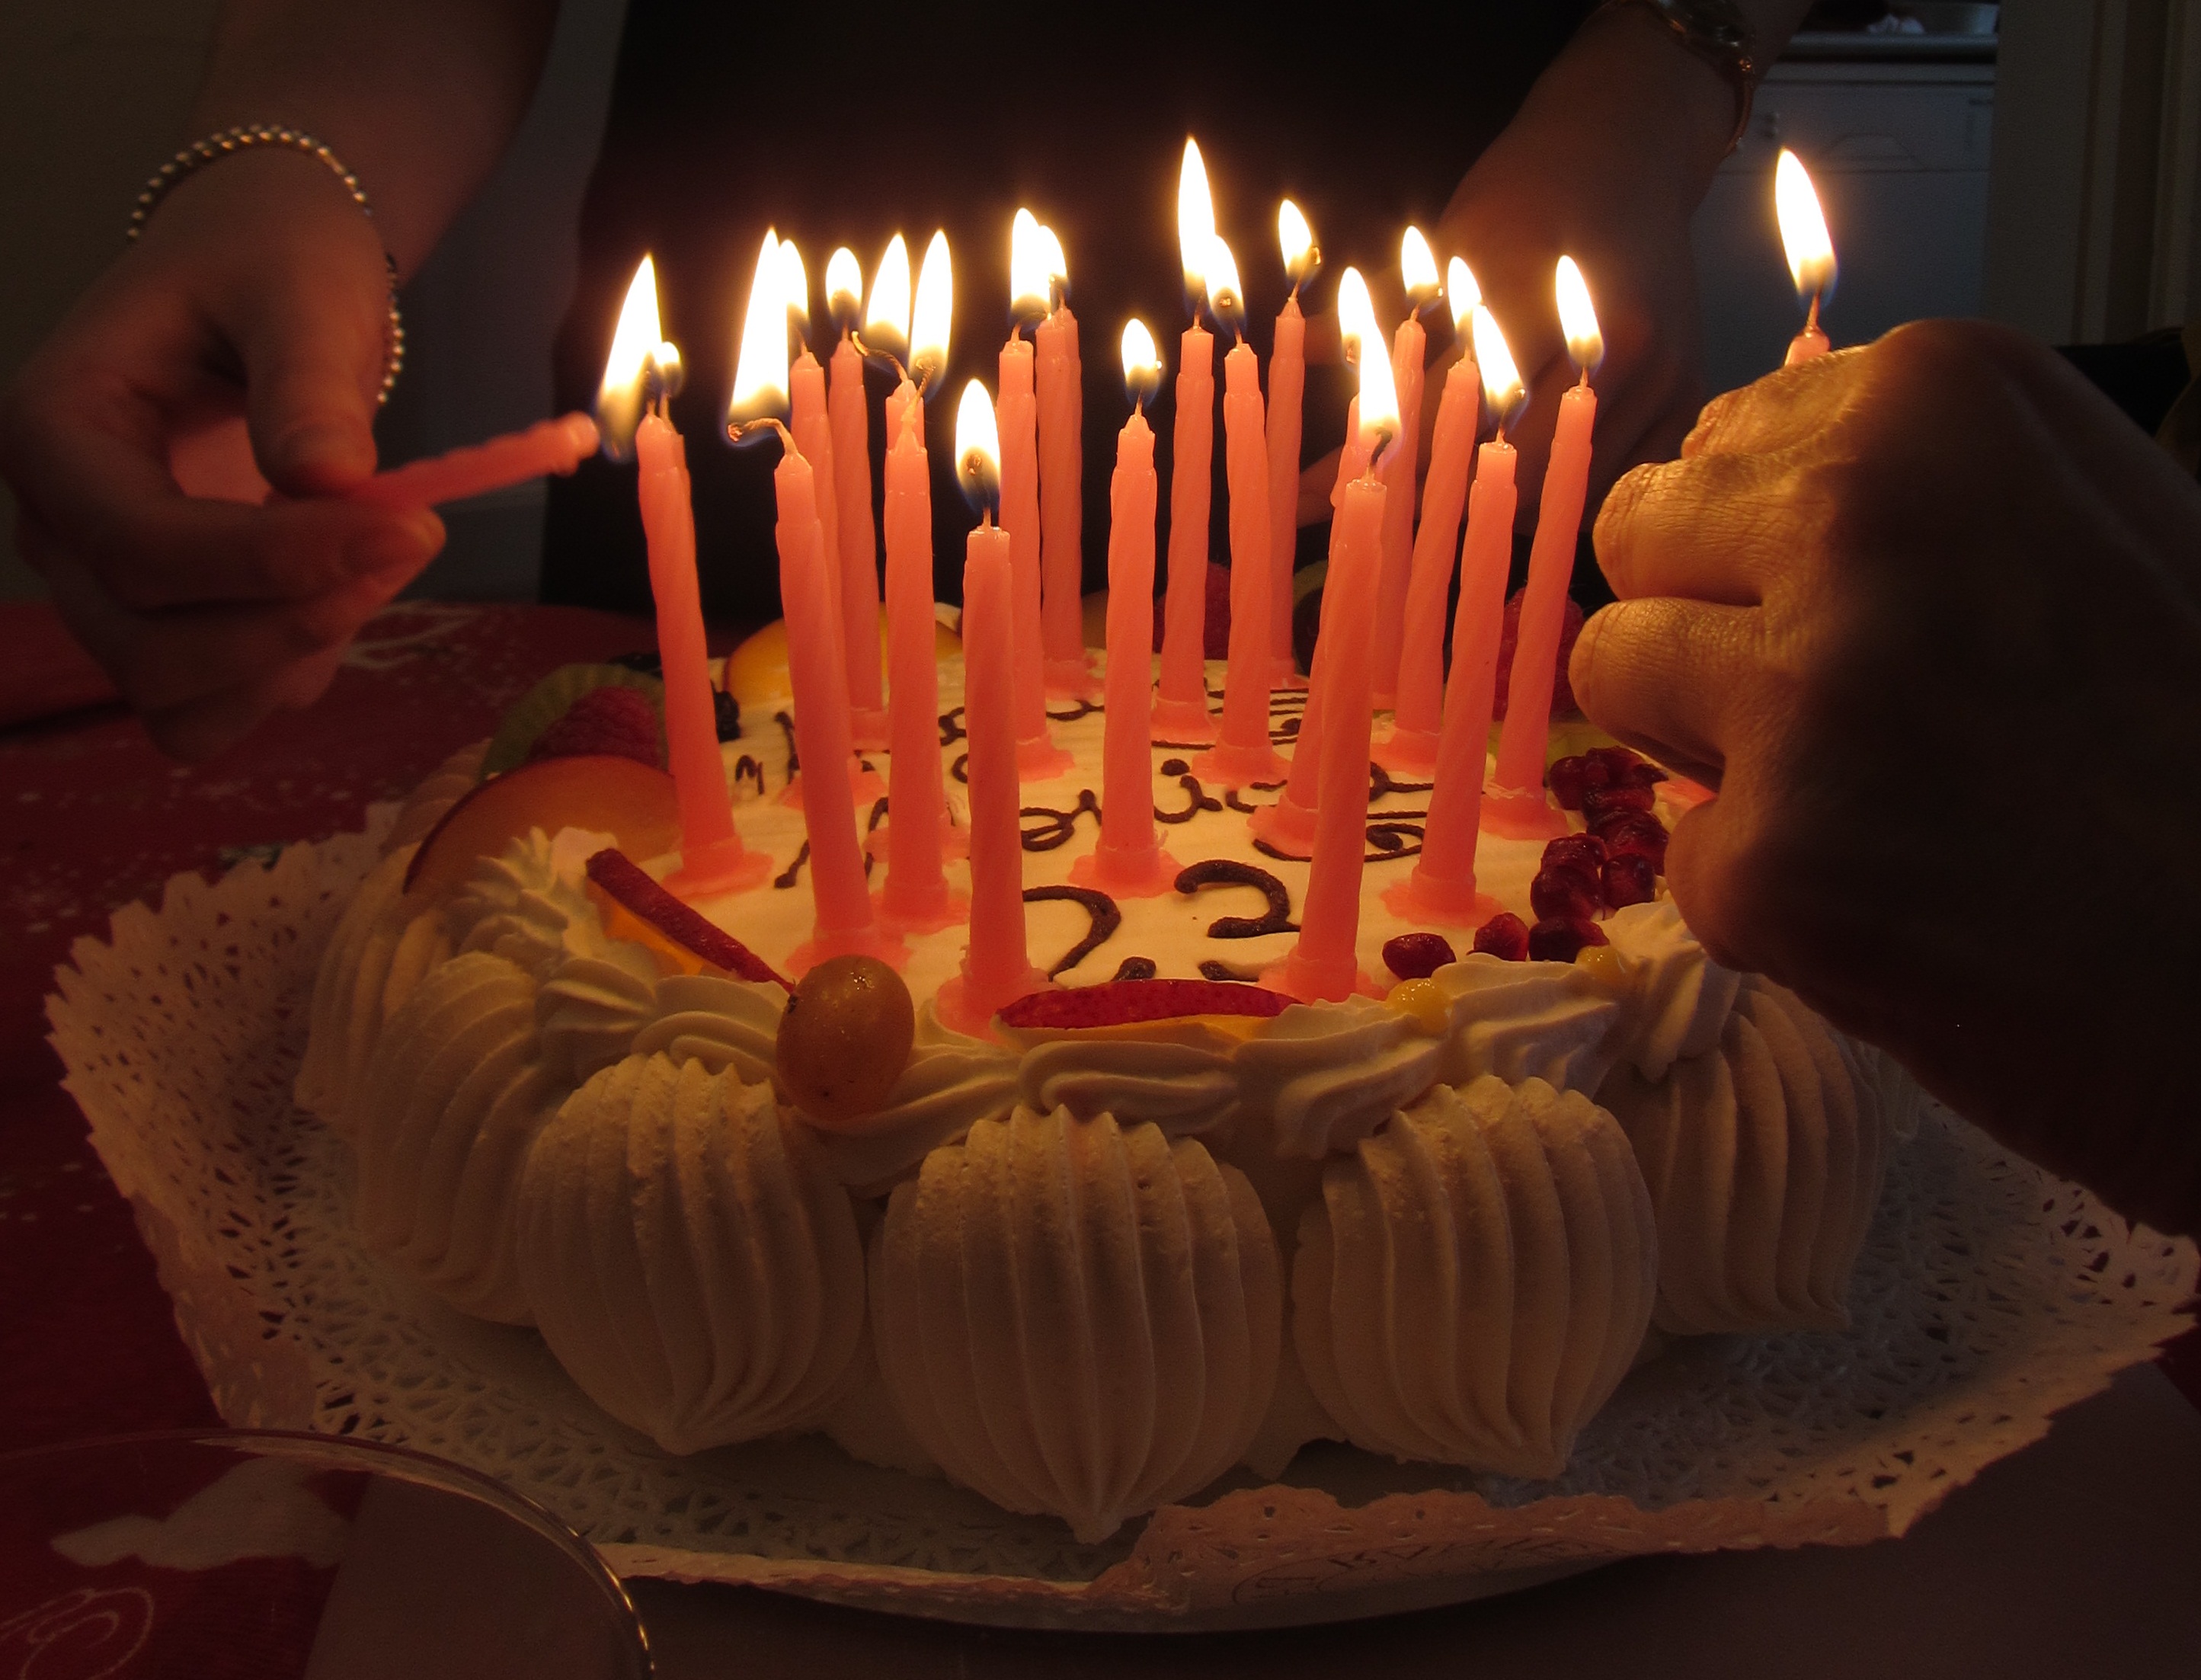 File Italy Birthday Cake With Candles 3 Jpg Wikimedia Commons